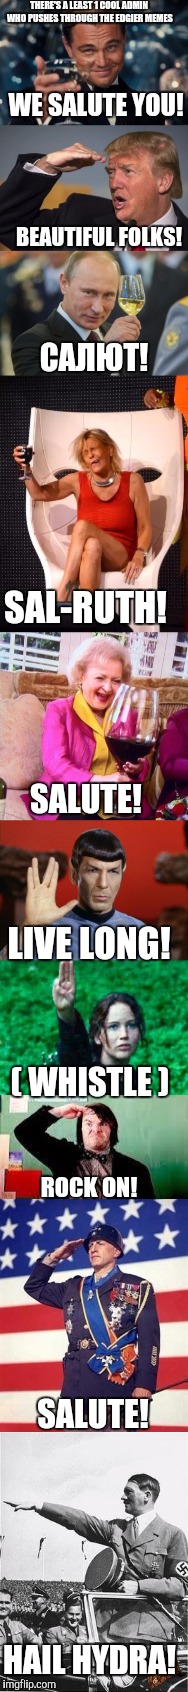 Salute! | THERE'S A LEAST 1 COOL ADMIN WHO PUSHES THROUGH THE EDGIER MEMES; WE SALUTE YOU! BEAUTIFUL FOLKS! САЛЮТ! SAL-RUTH! SALUTE! LIVE LONG! ( WHISTLE ); ROCK ON! SALUTE! HAIL HYDRA! | image tagged in memes | made w/ Imgflip meme maker